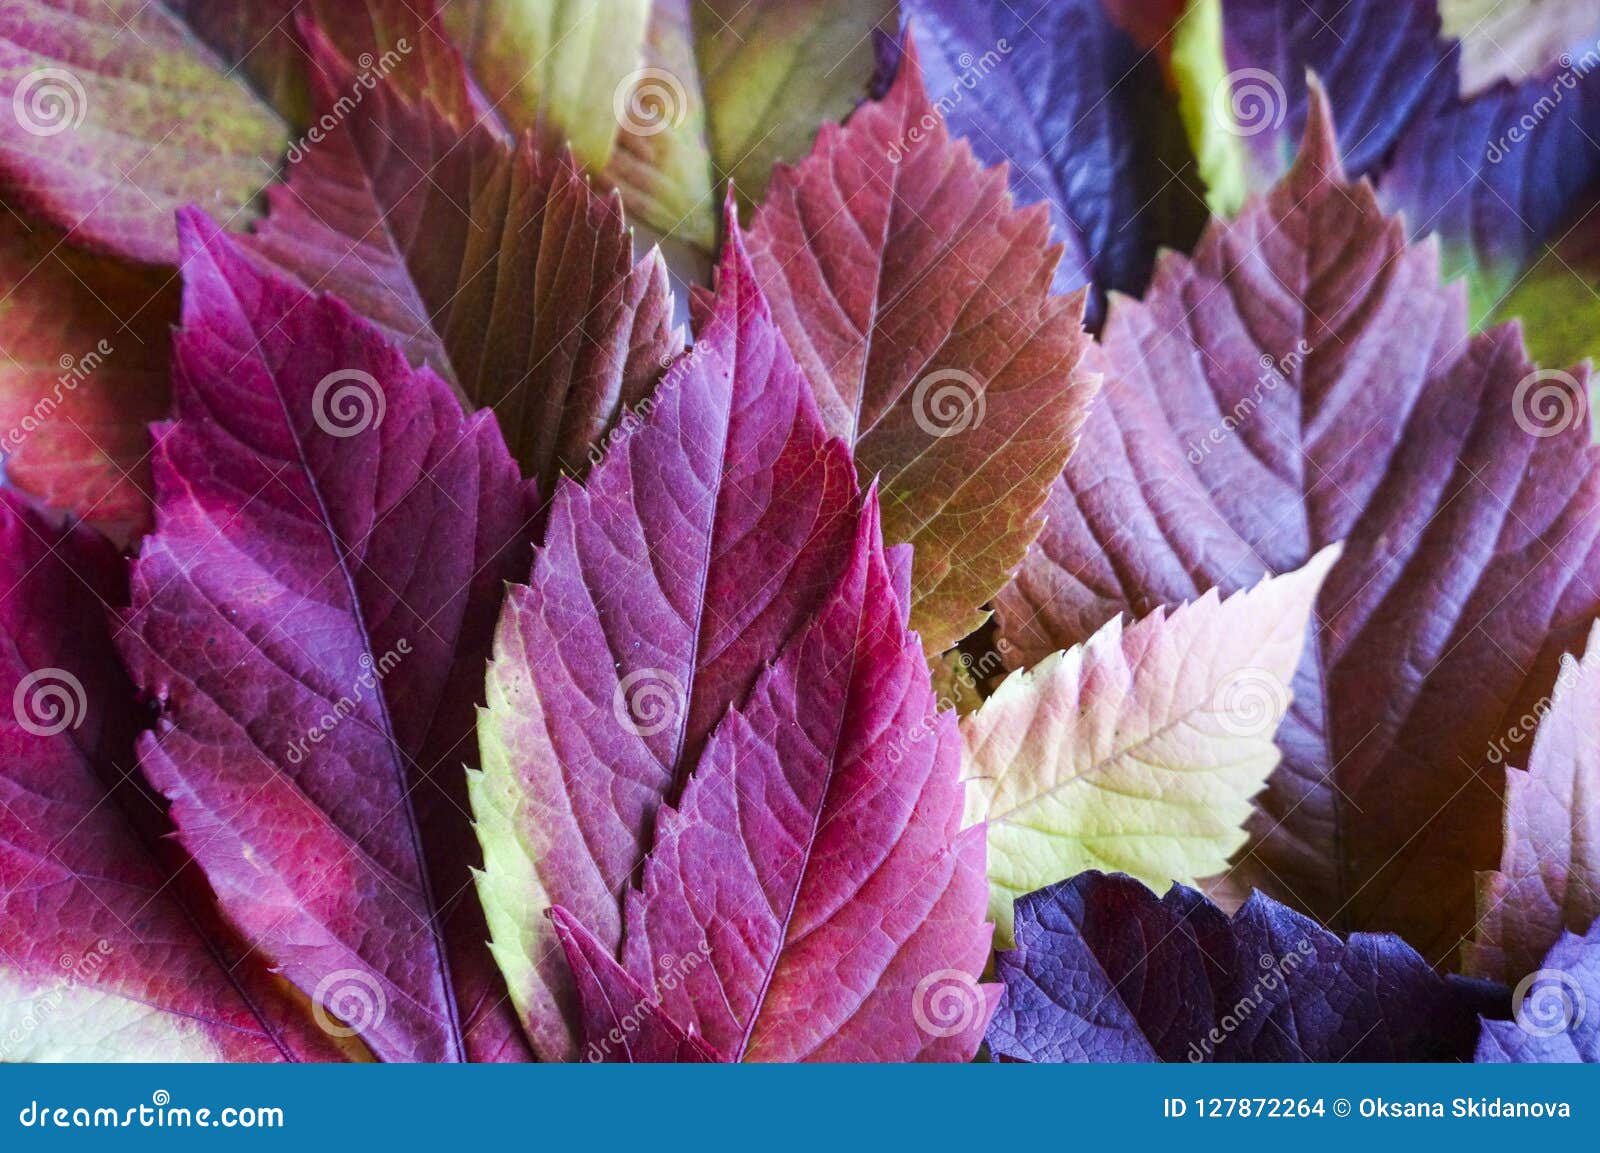 Autumn Leaves. Colorful Autumn Leaves of Wild Grapes. Autumn Time ...